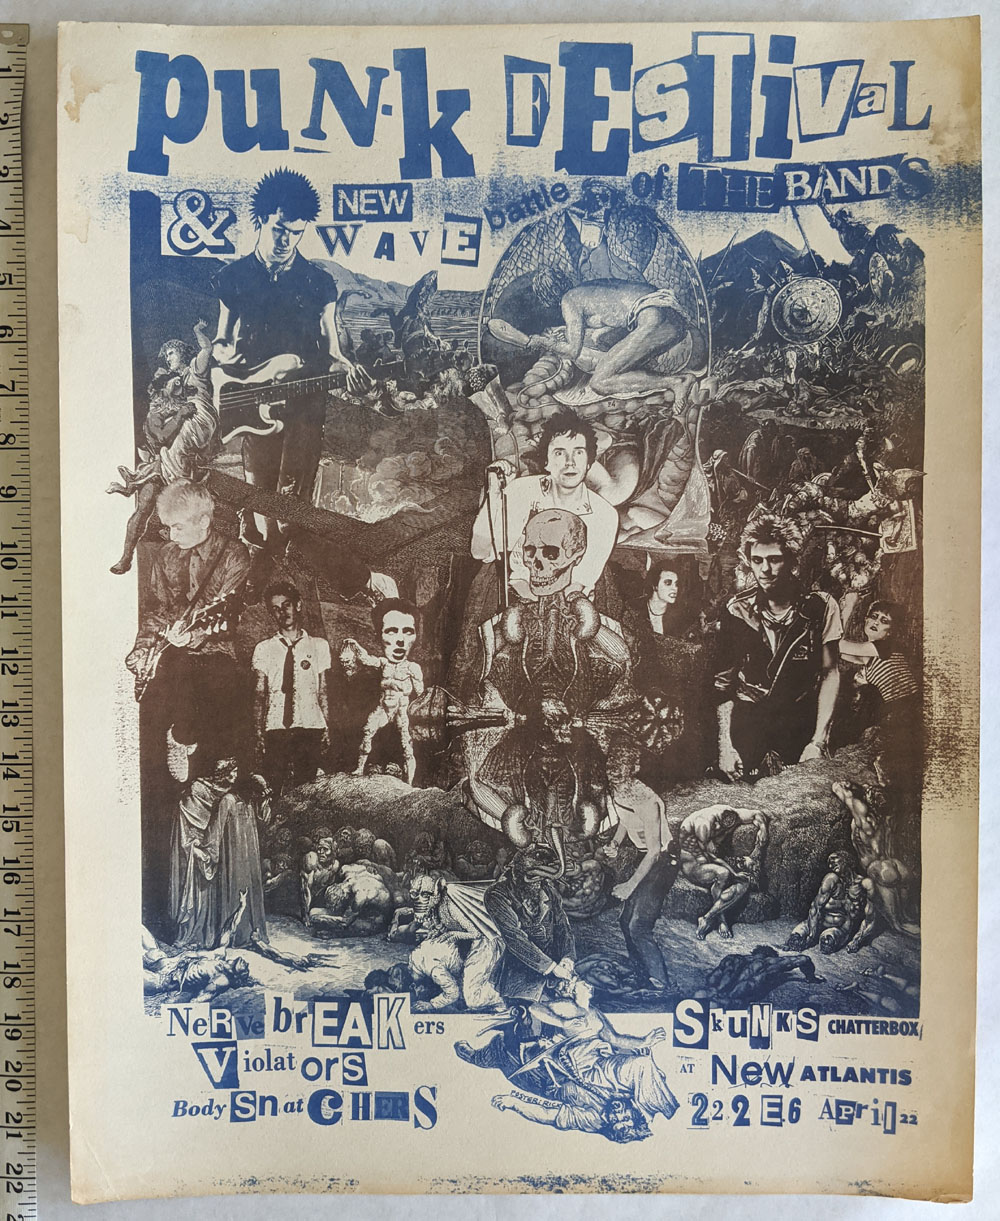 PUNK FESTIVAL & NEW WAVE BATTLE OF THE BANDS postervariant #3